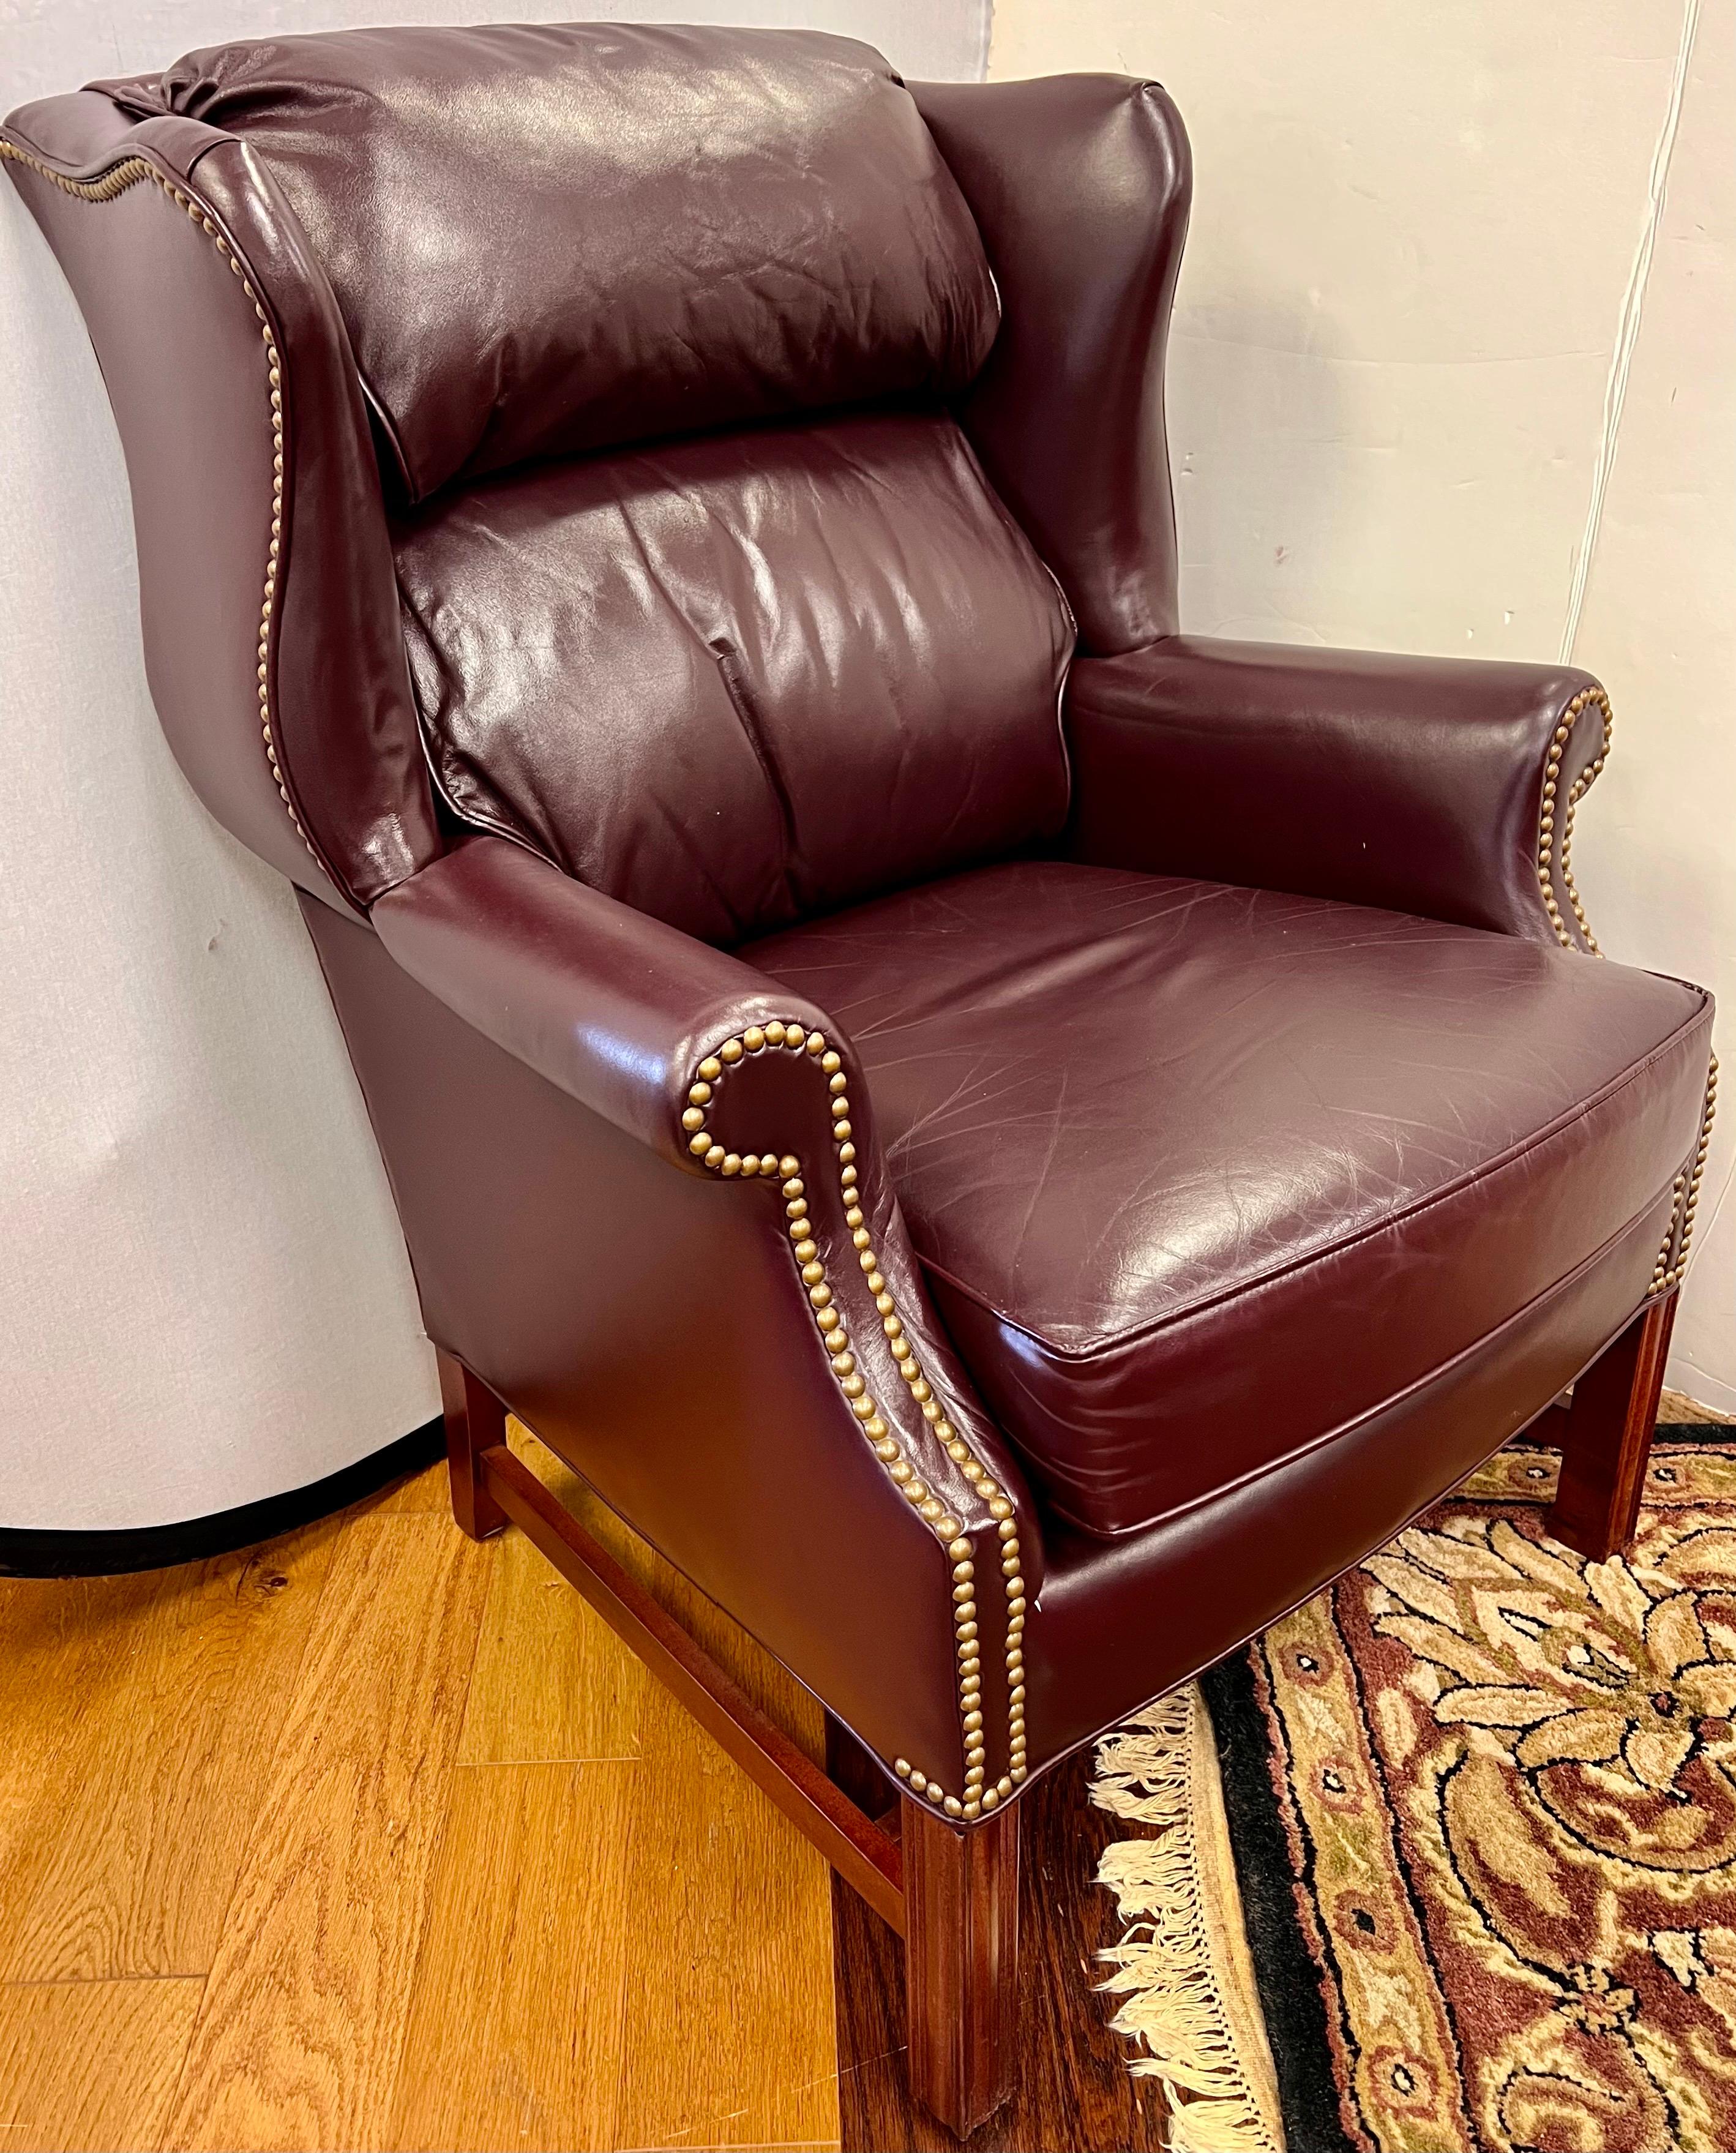 Handsome and luxurious Sam Moore leather wingback chair with rich burgundy color accented with nailhead trim all around and supported by mahogany legs.